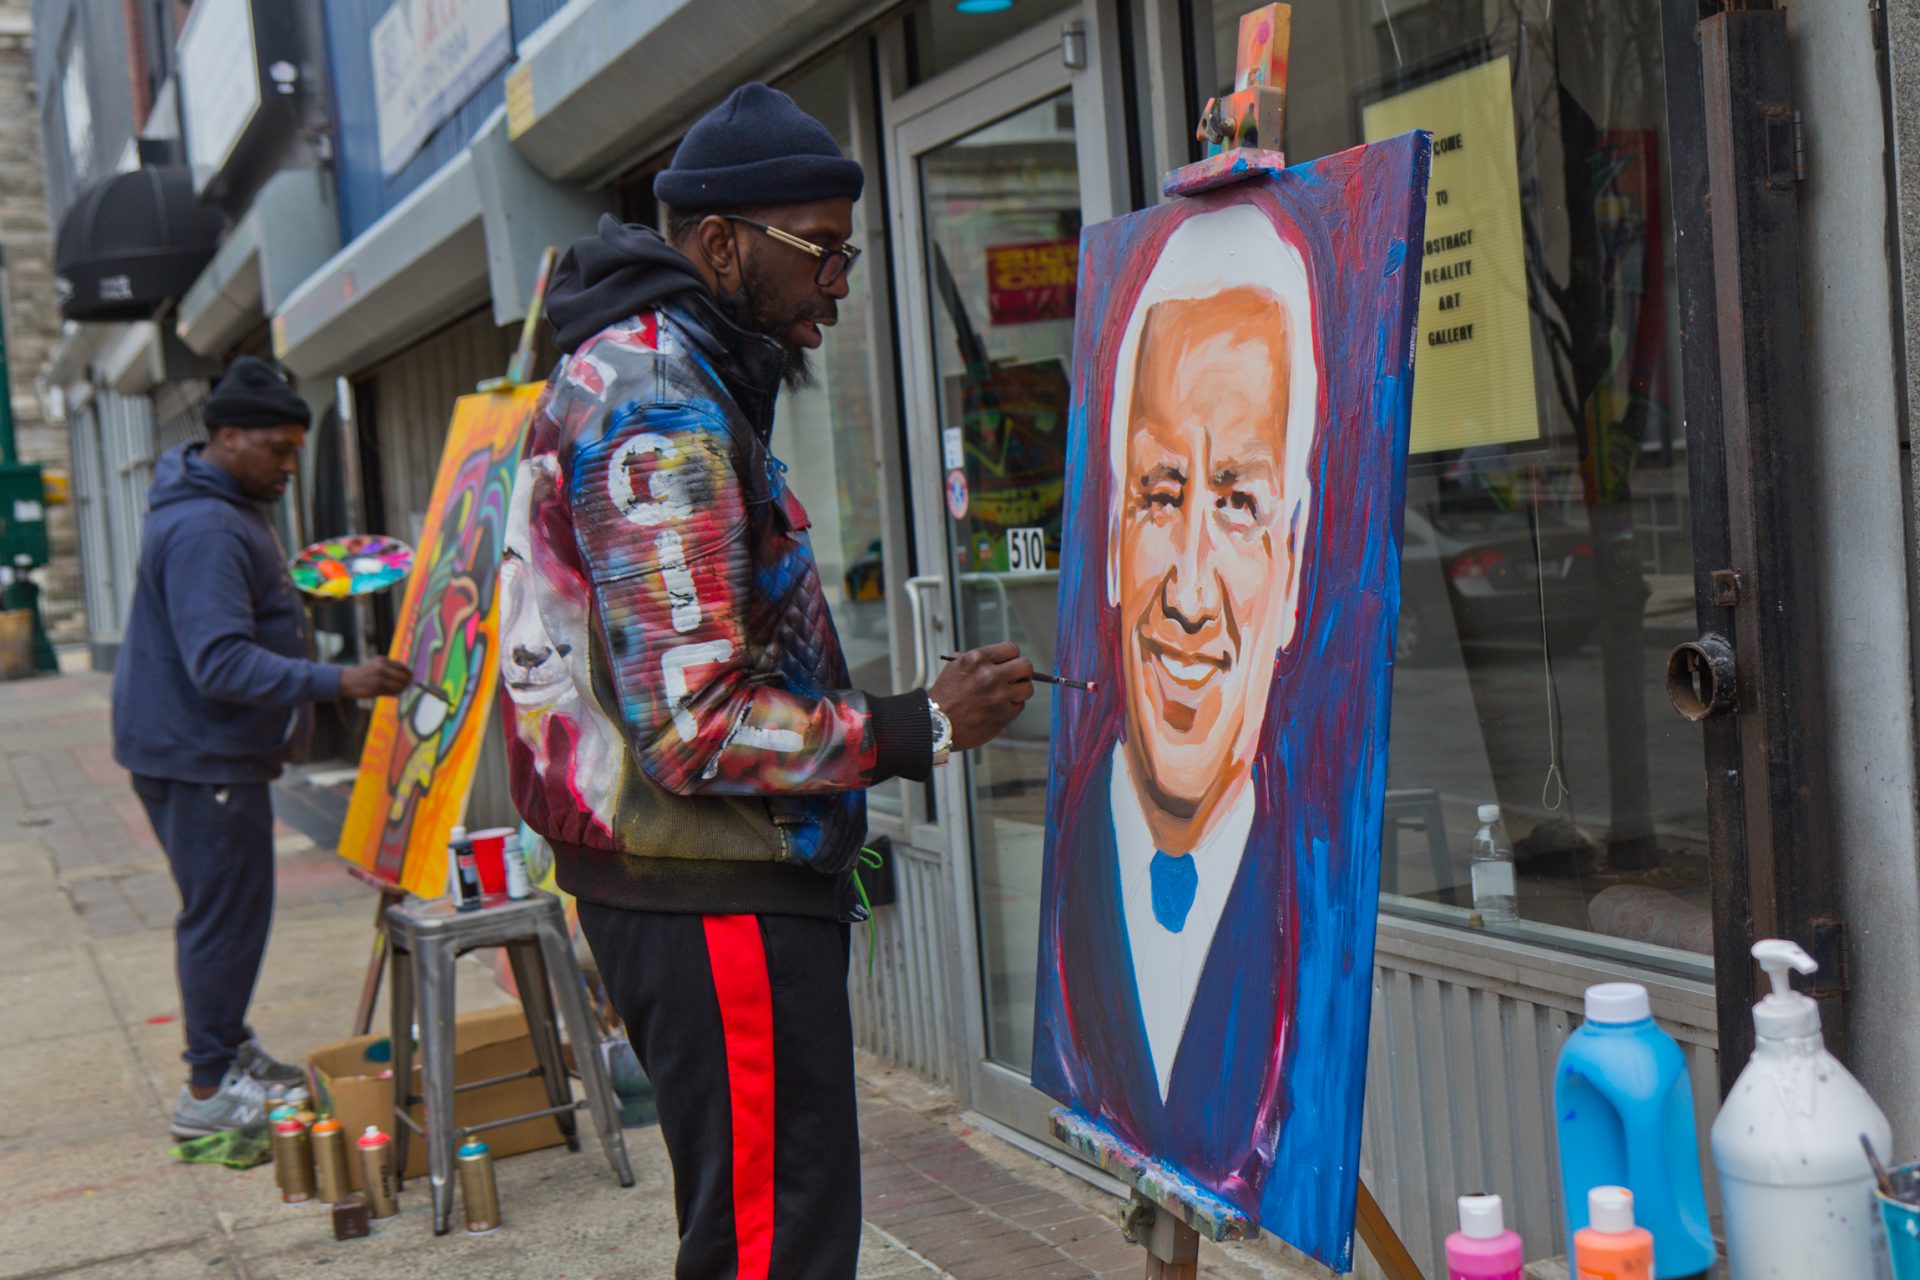 Emmanuel Fitzpatrick (right) paints President Biden in front of Abstract Reality Art Gallery in Chester, Pa., on March 16, 2021.